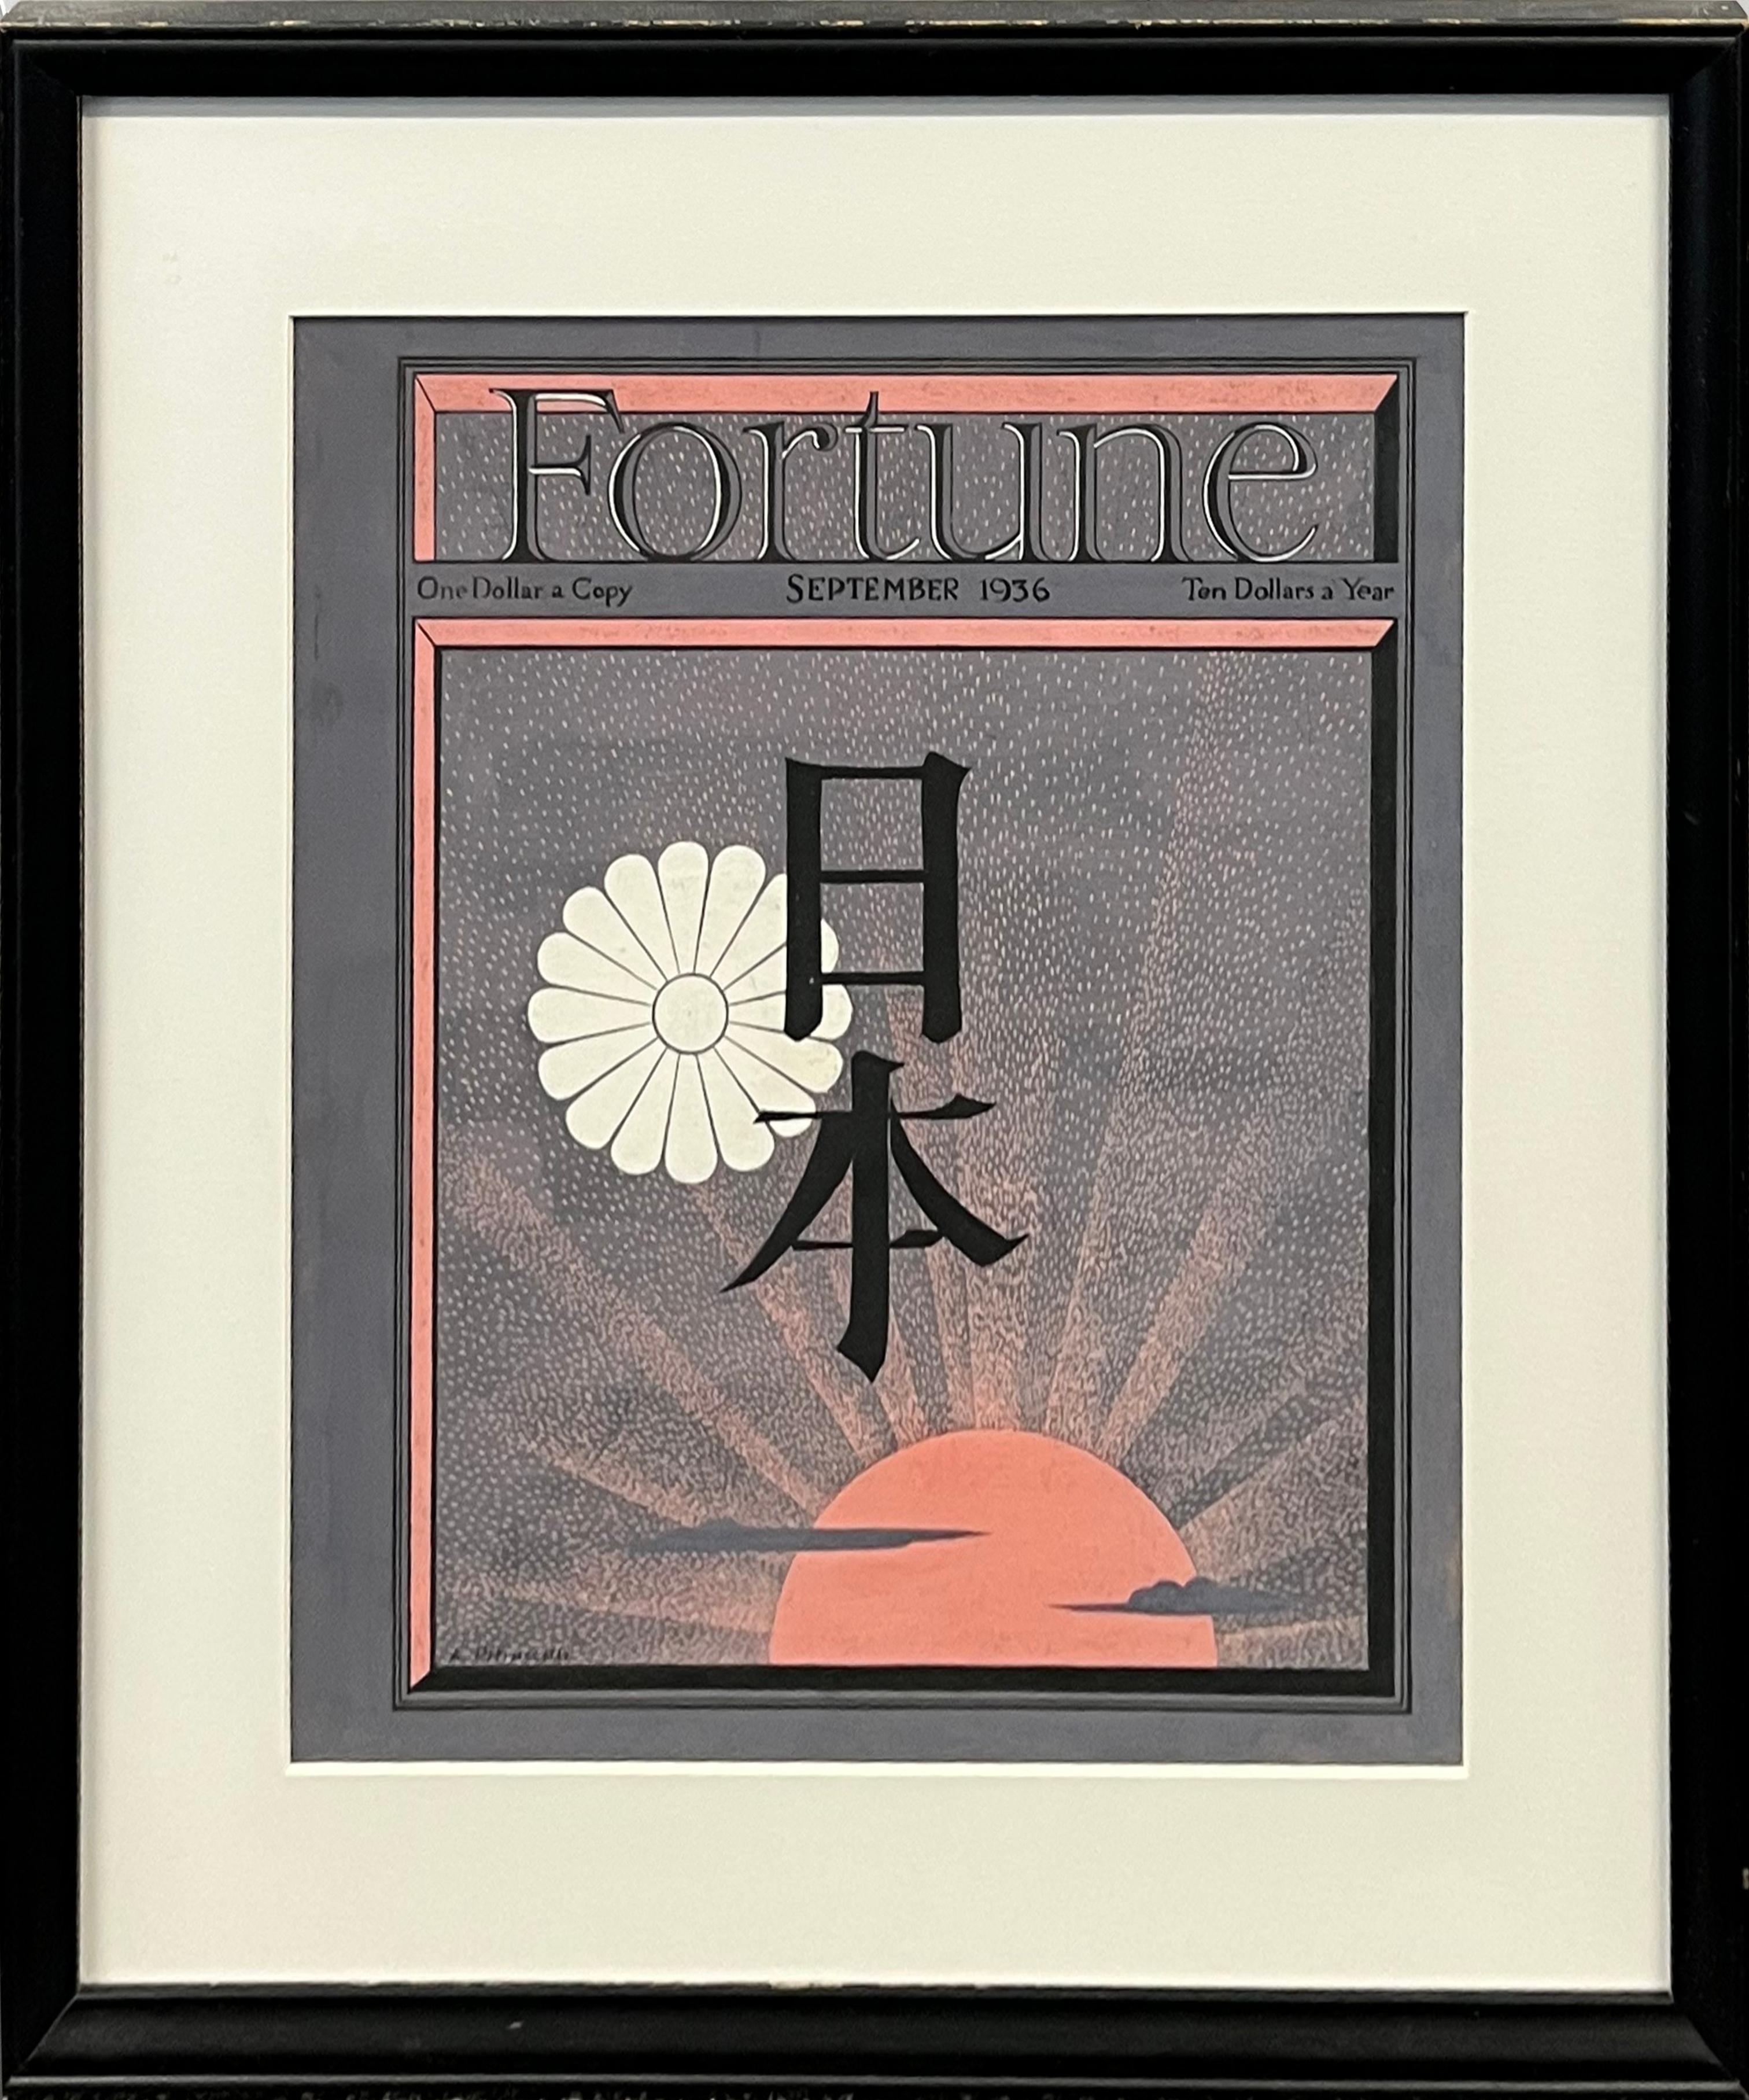 Japan Issue Fortune Magazine Cover Proposal Japanese Mid-Century Illustration - Art by Antonio Petruccelli